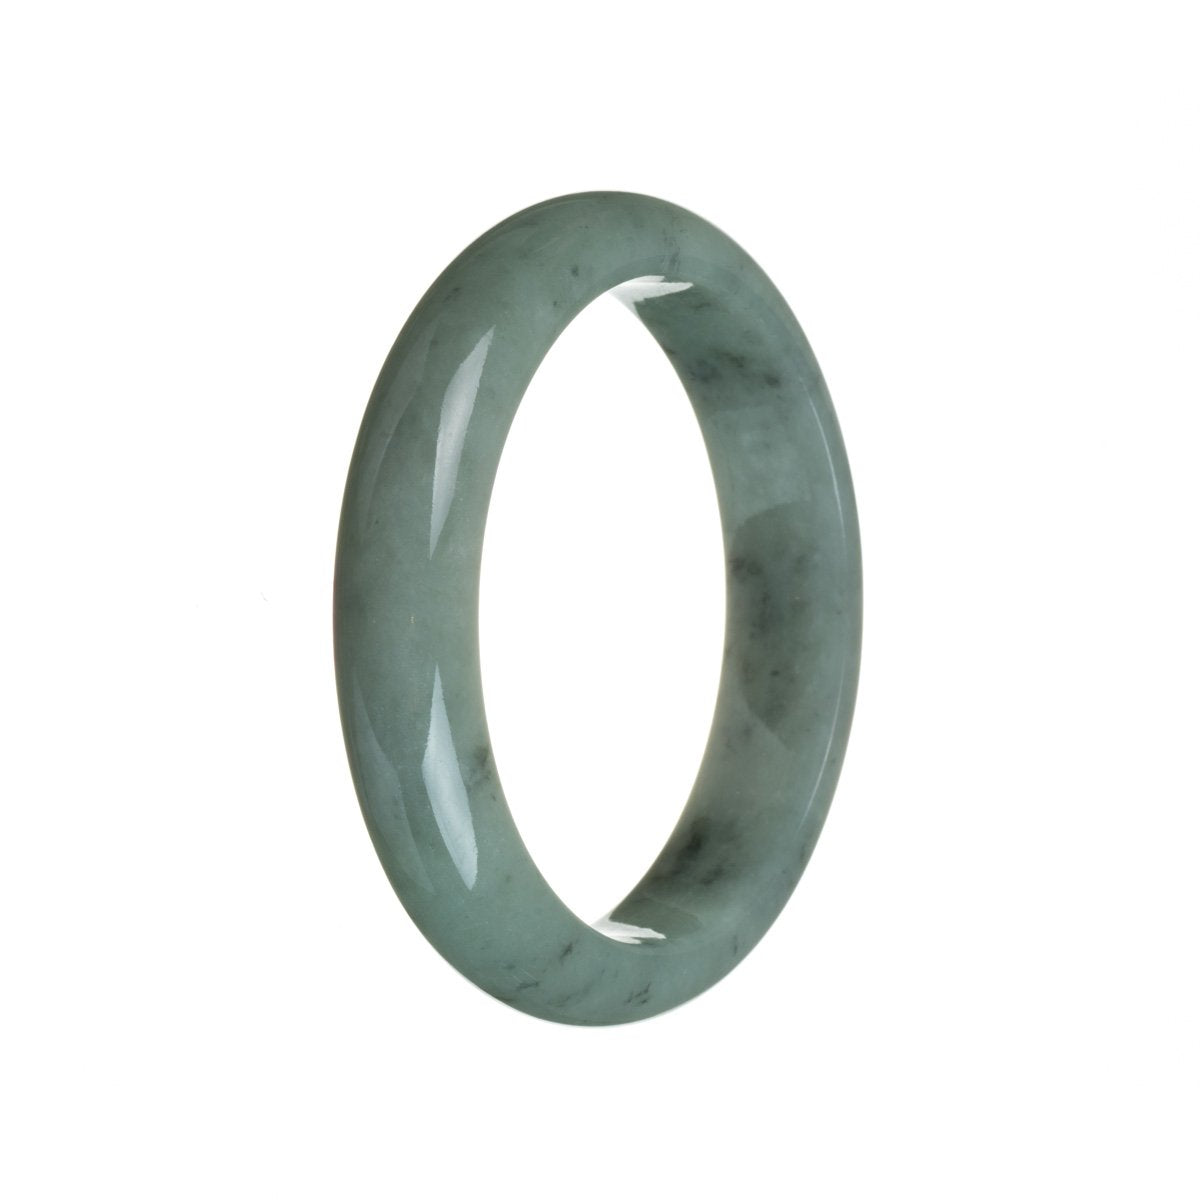 A close-up image of a real grade A grey traditional jade bracelet. The bracelet is 59mm in size and has a semi-round shape. It is a product of MAYS GEMS.